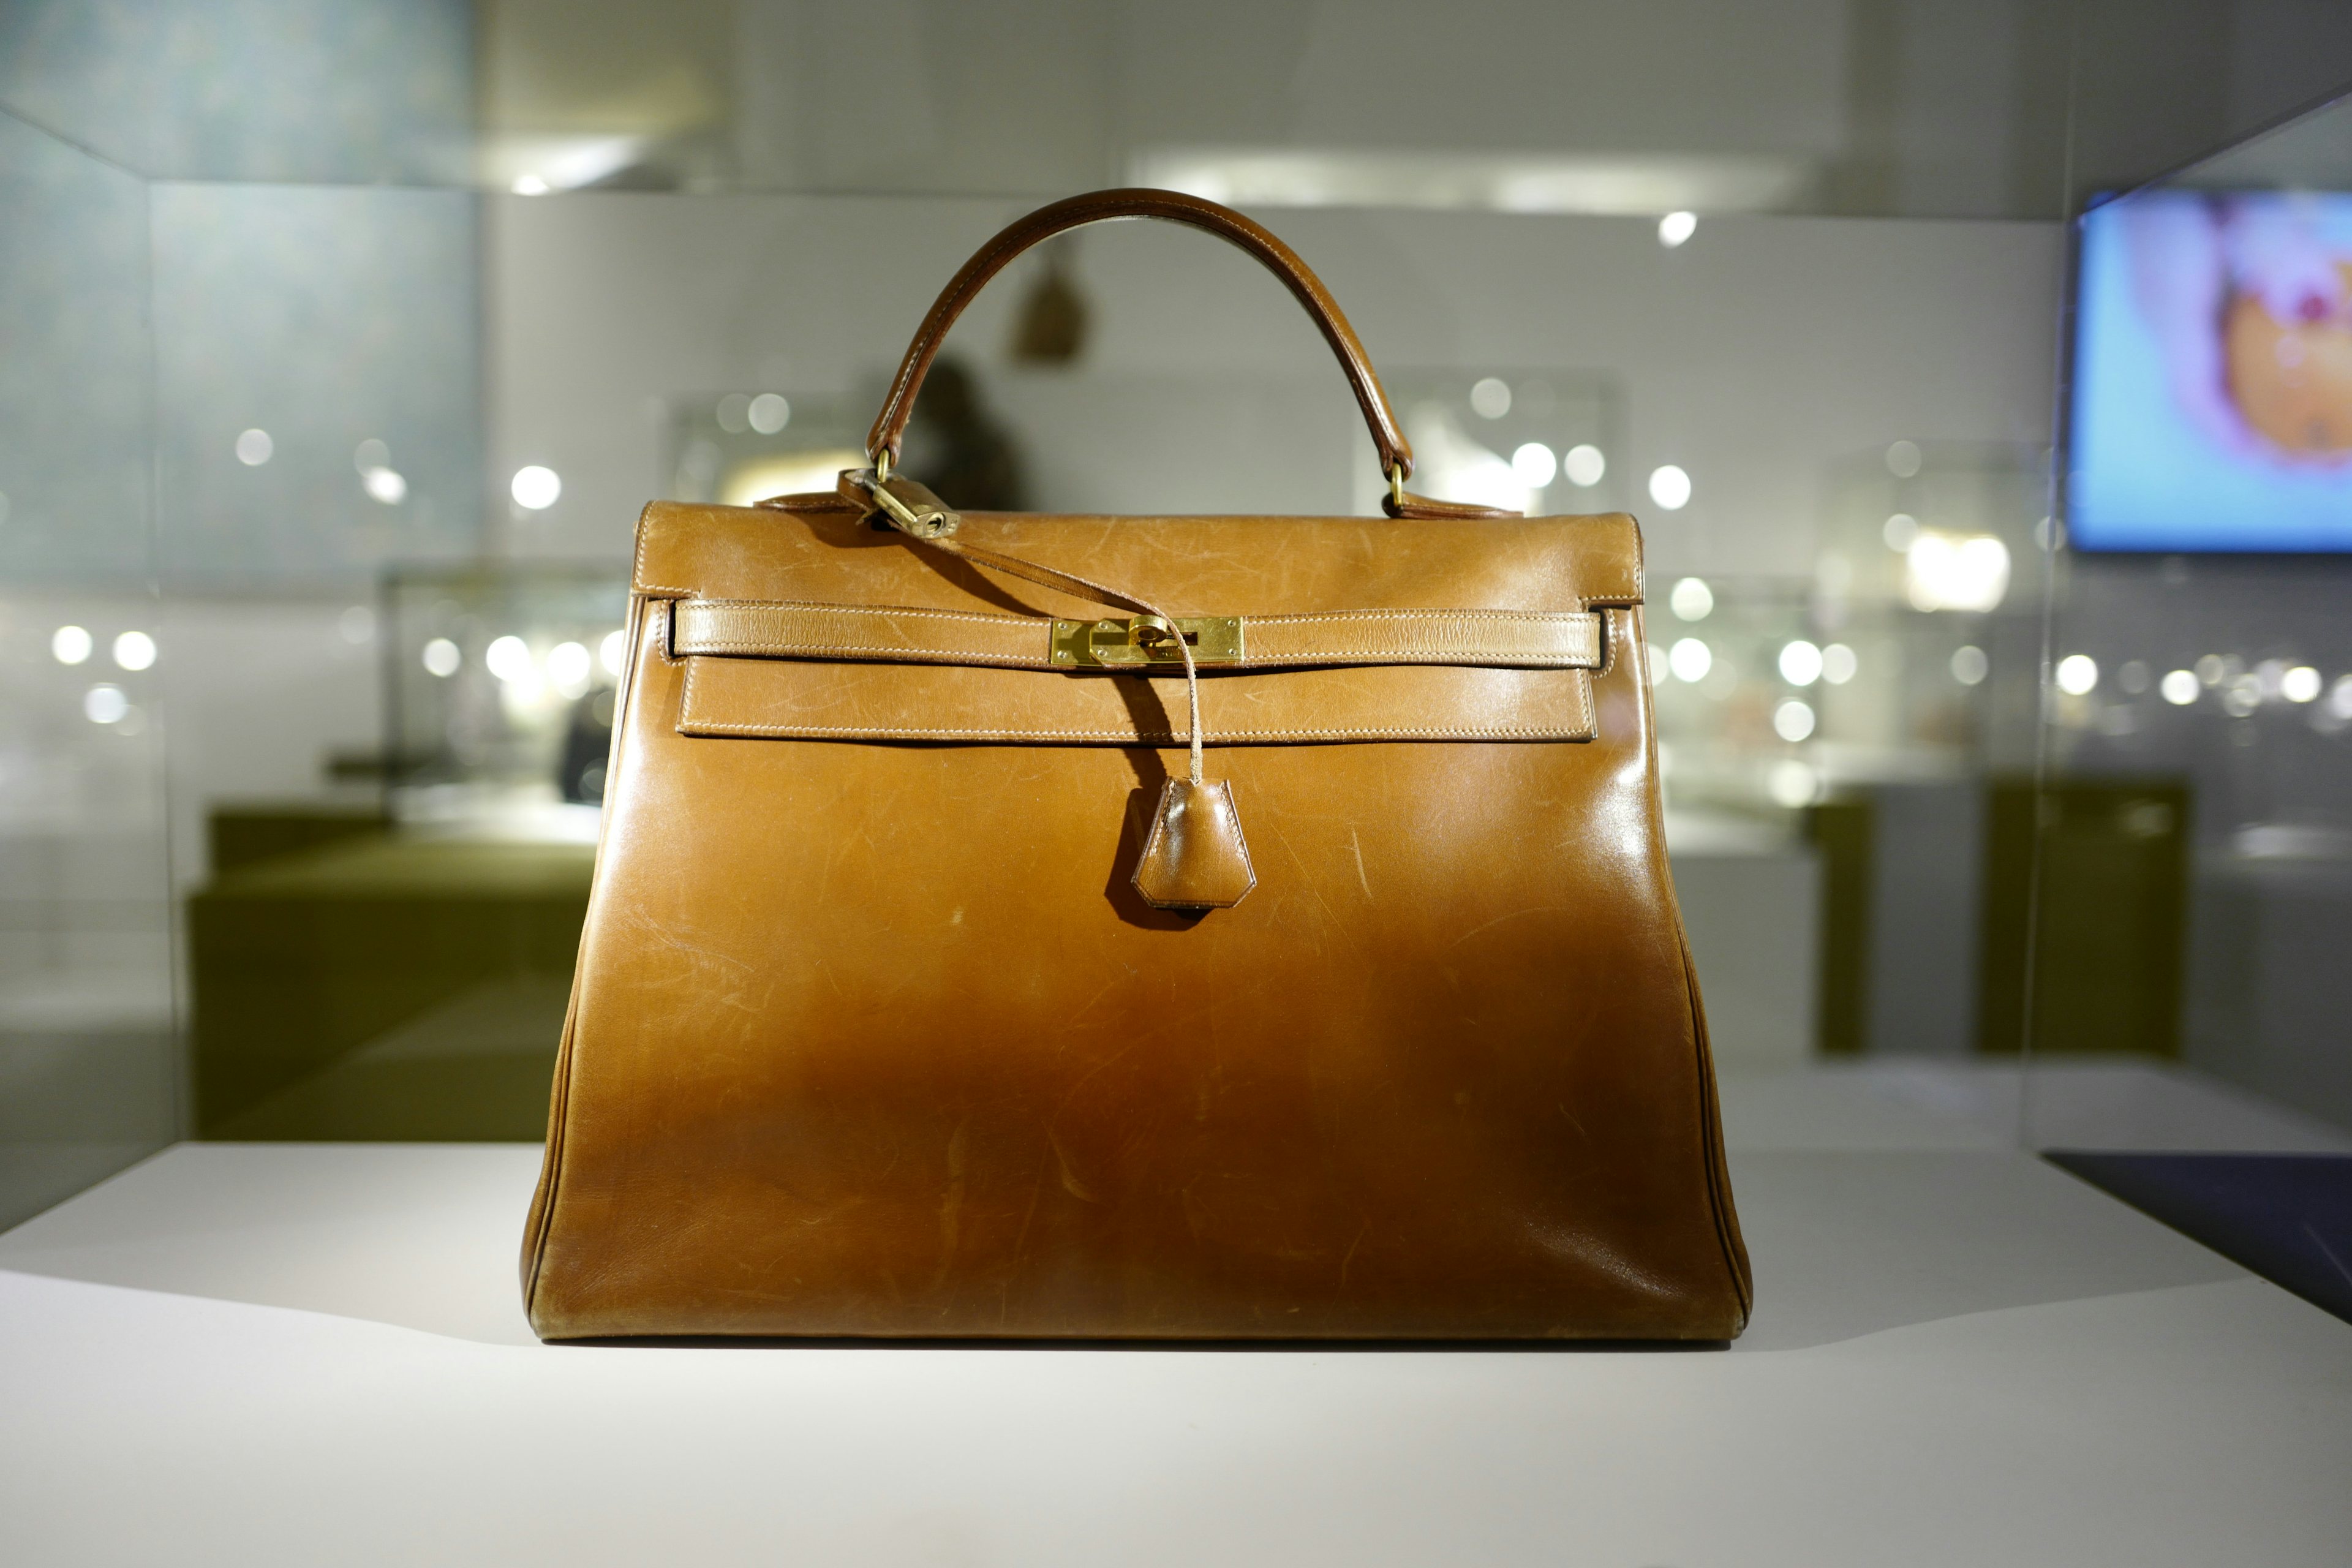 One Bagism's highlights is the Hermès Box Calf Kelly bag popularized by Princess Grace Kelly. (Courtesy Photo)